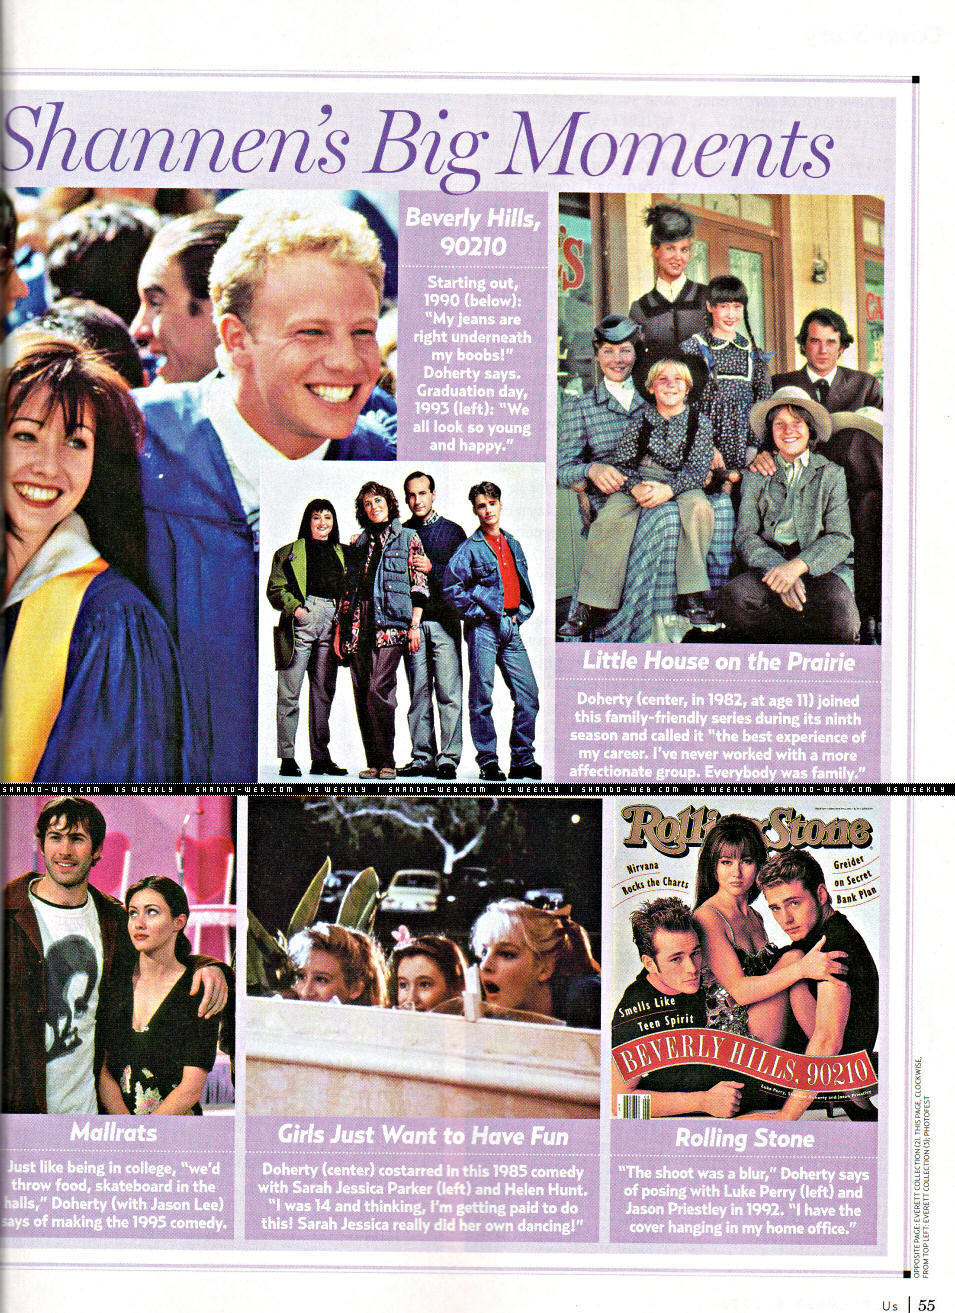 http://images1.fanpop.com/images/photos/2200000/Shannen-US-Weekly-beverly-hills-90210-2216610-955-1313.jpg